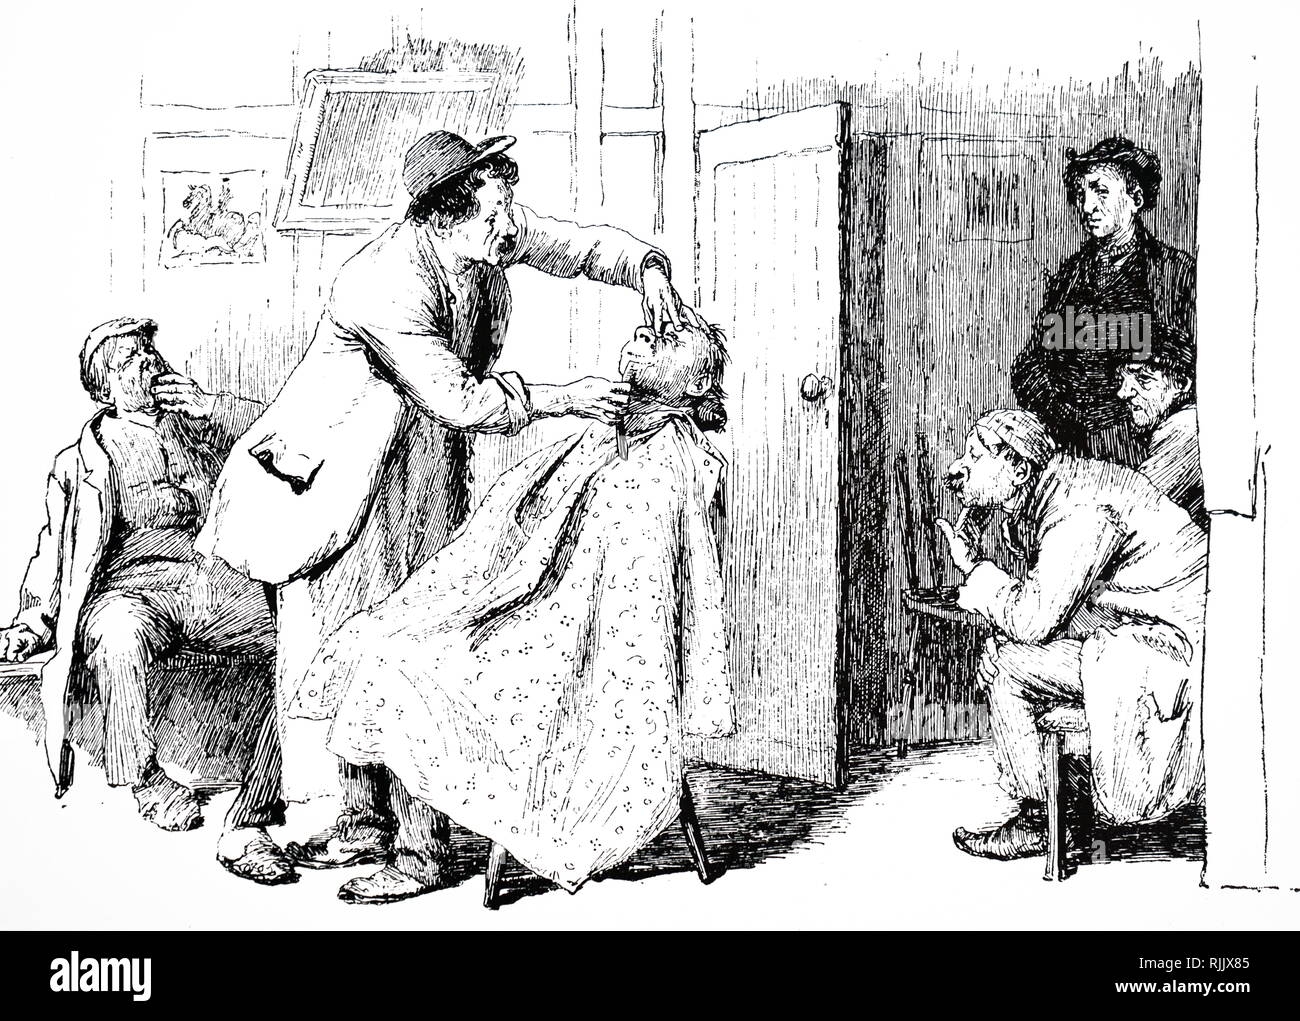 A cartoon depicting a barber's shop in a poor district of London. Illustrated by Hugh Thomson (1860-1920) an Irish born illustrator. Dated 19th century Stock Photo